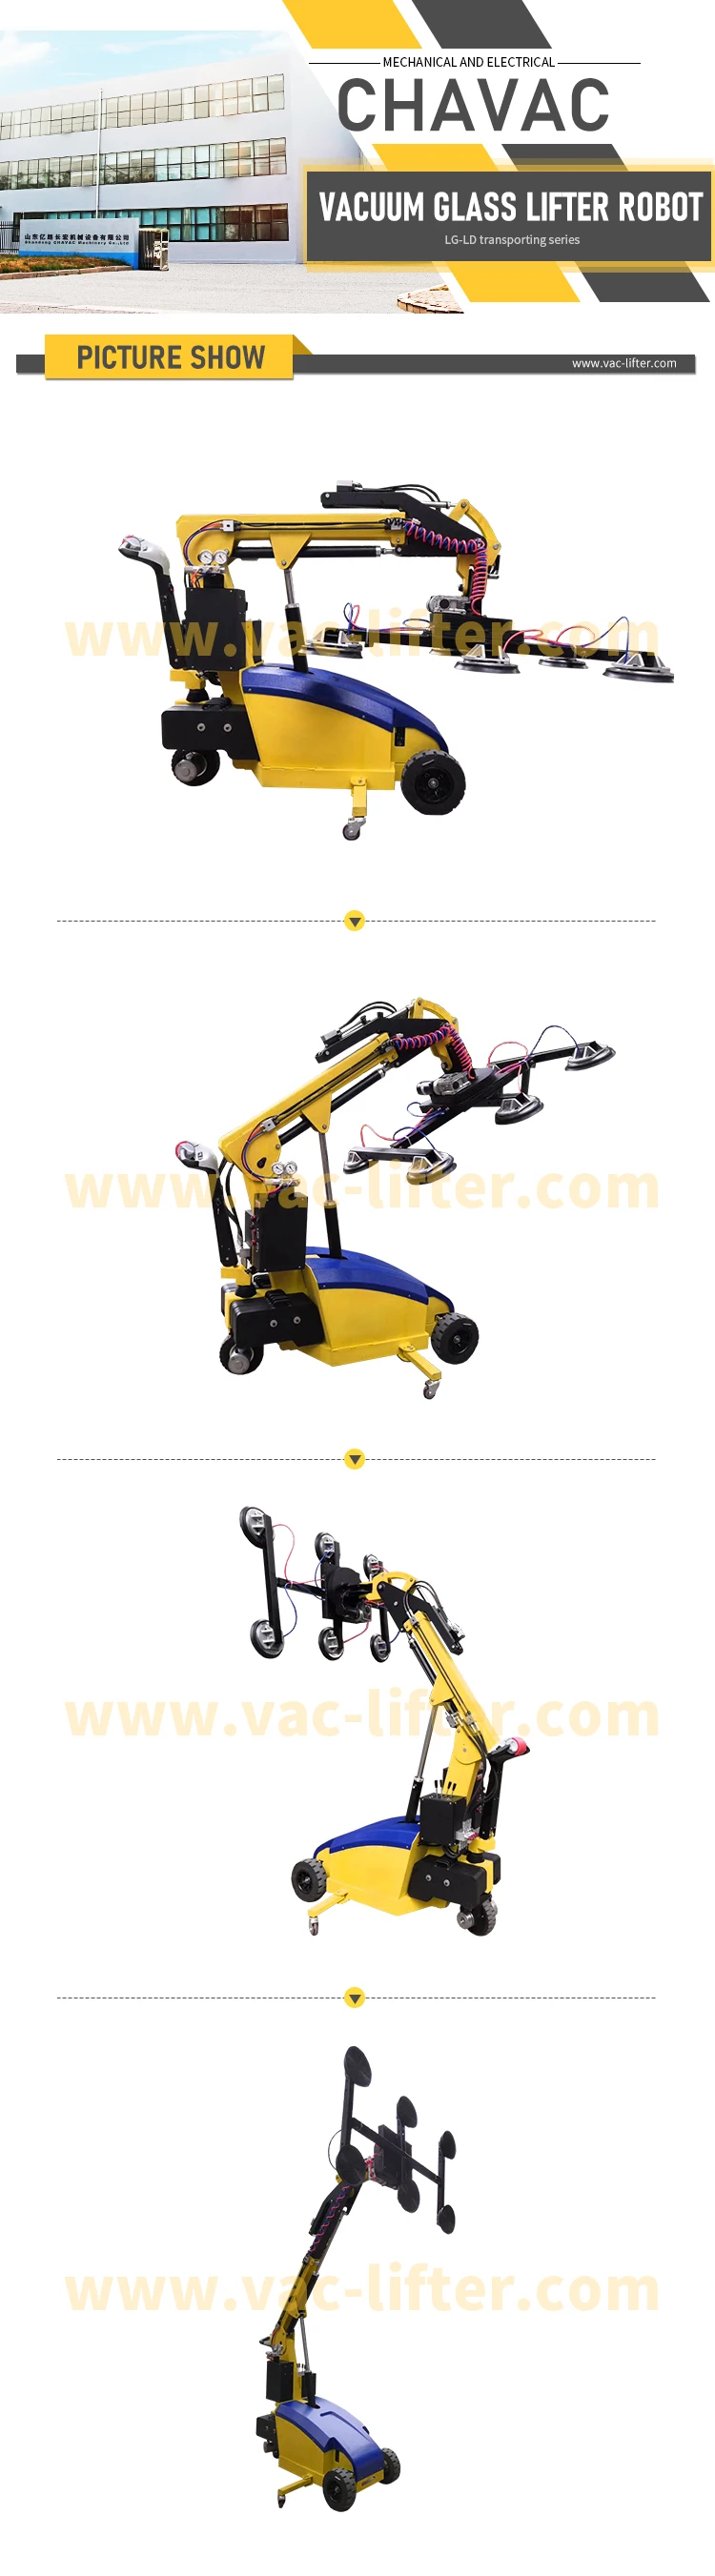 800kg Outdoor All Terrain Vacuum Lifter for Handling and Processing Heavy and Large Glass Glazing Tools